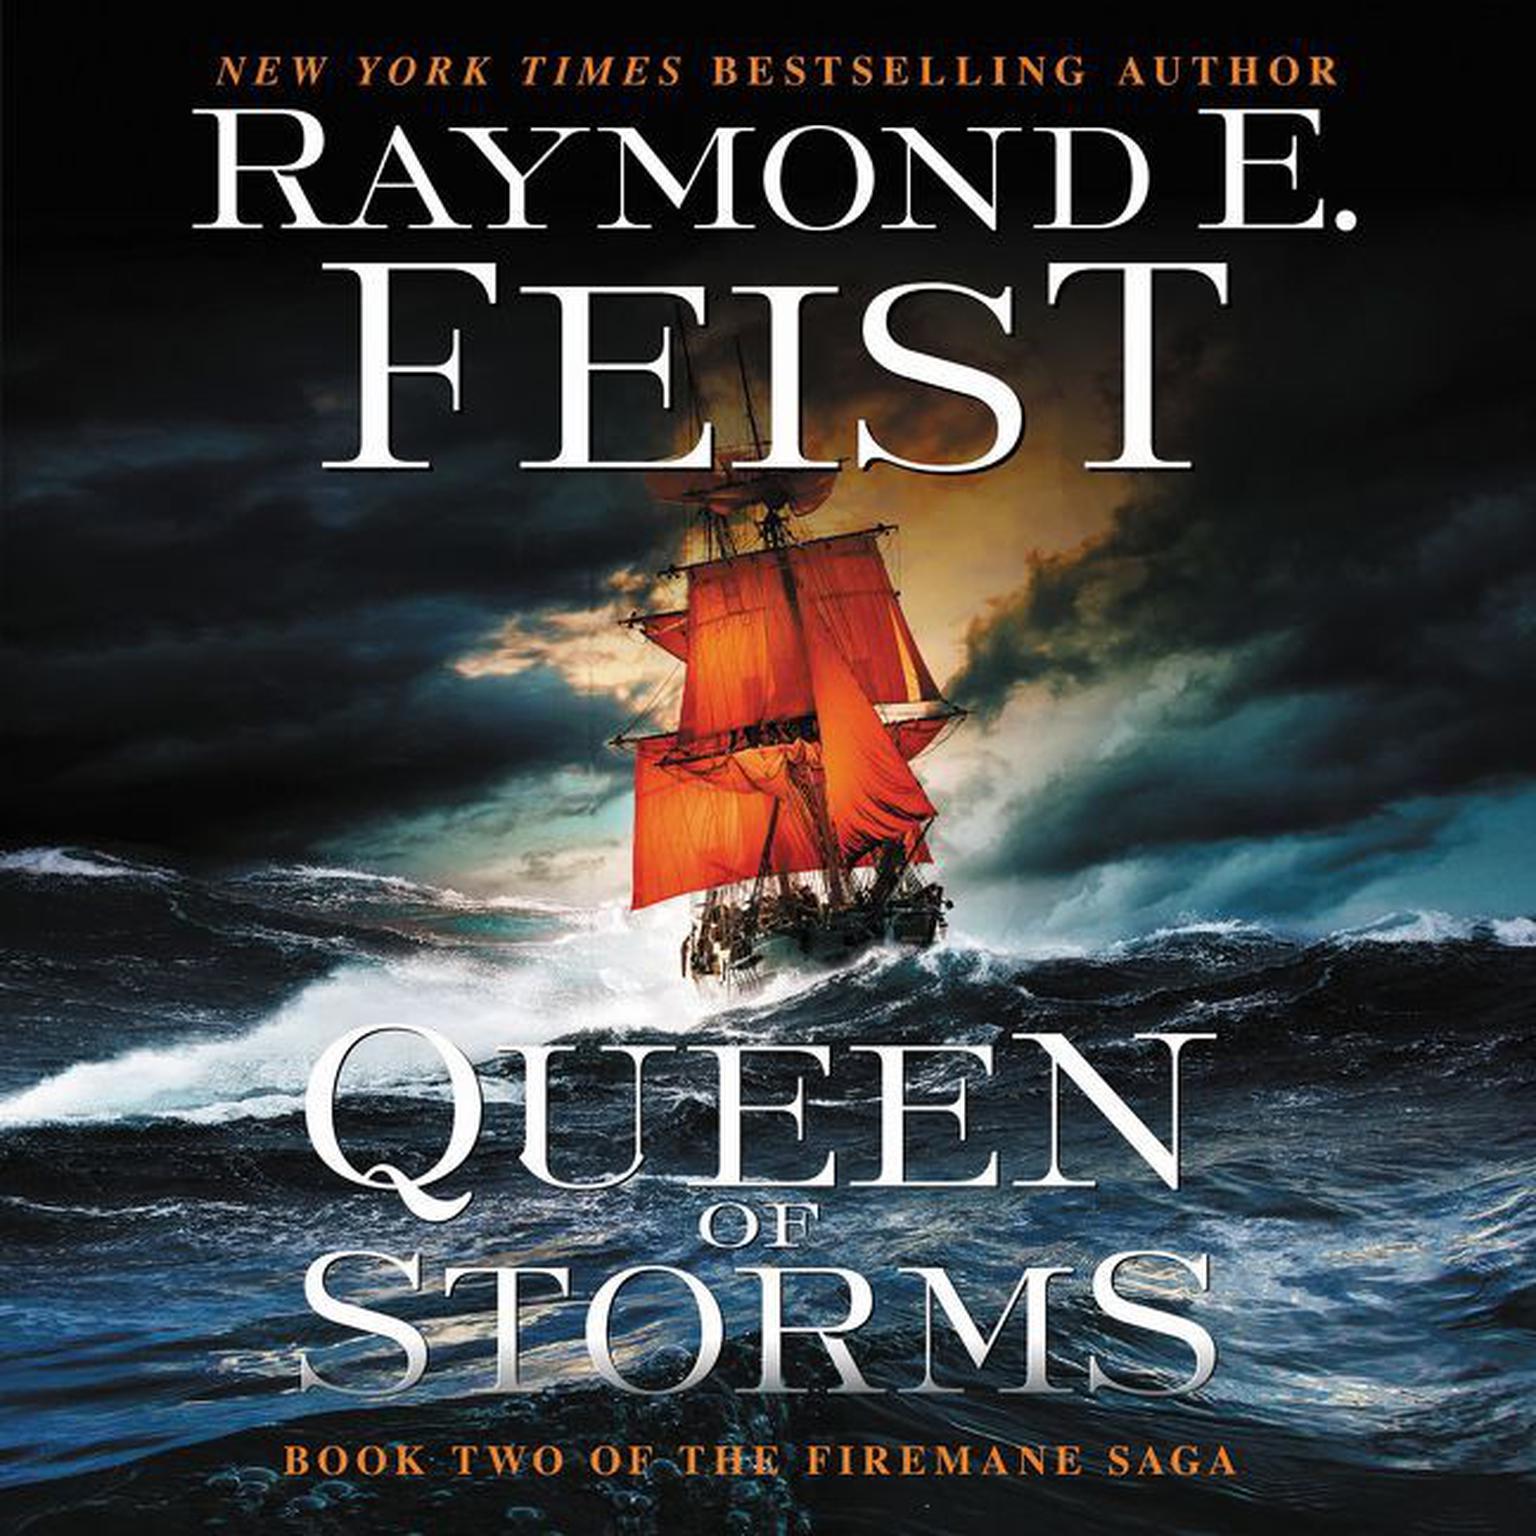 Queen of Storms: Book Two of the Firemane Saga Audiobook, by Raymond E. Feist